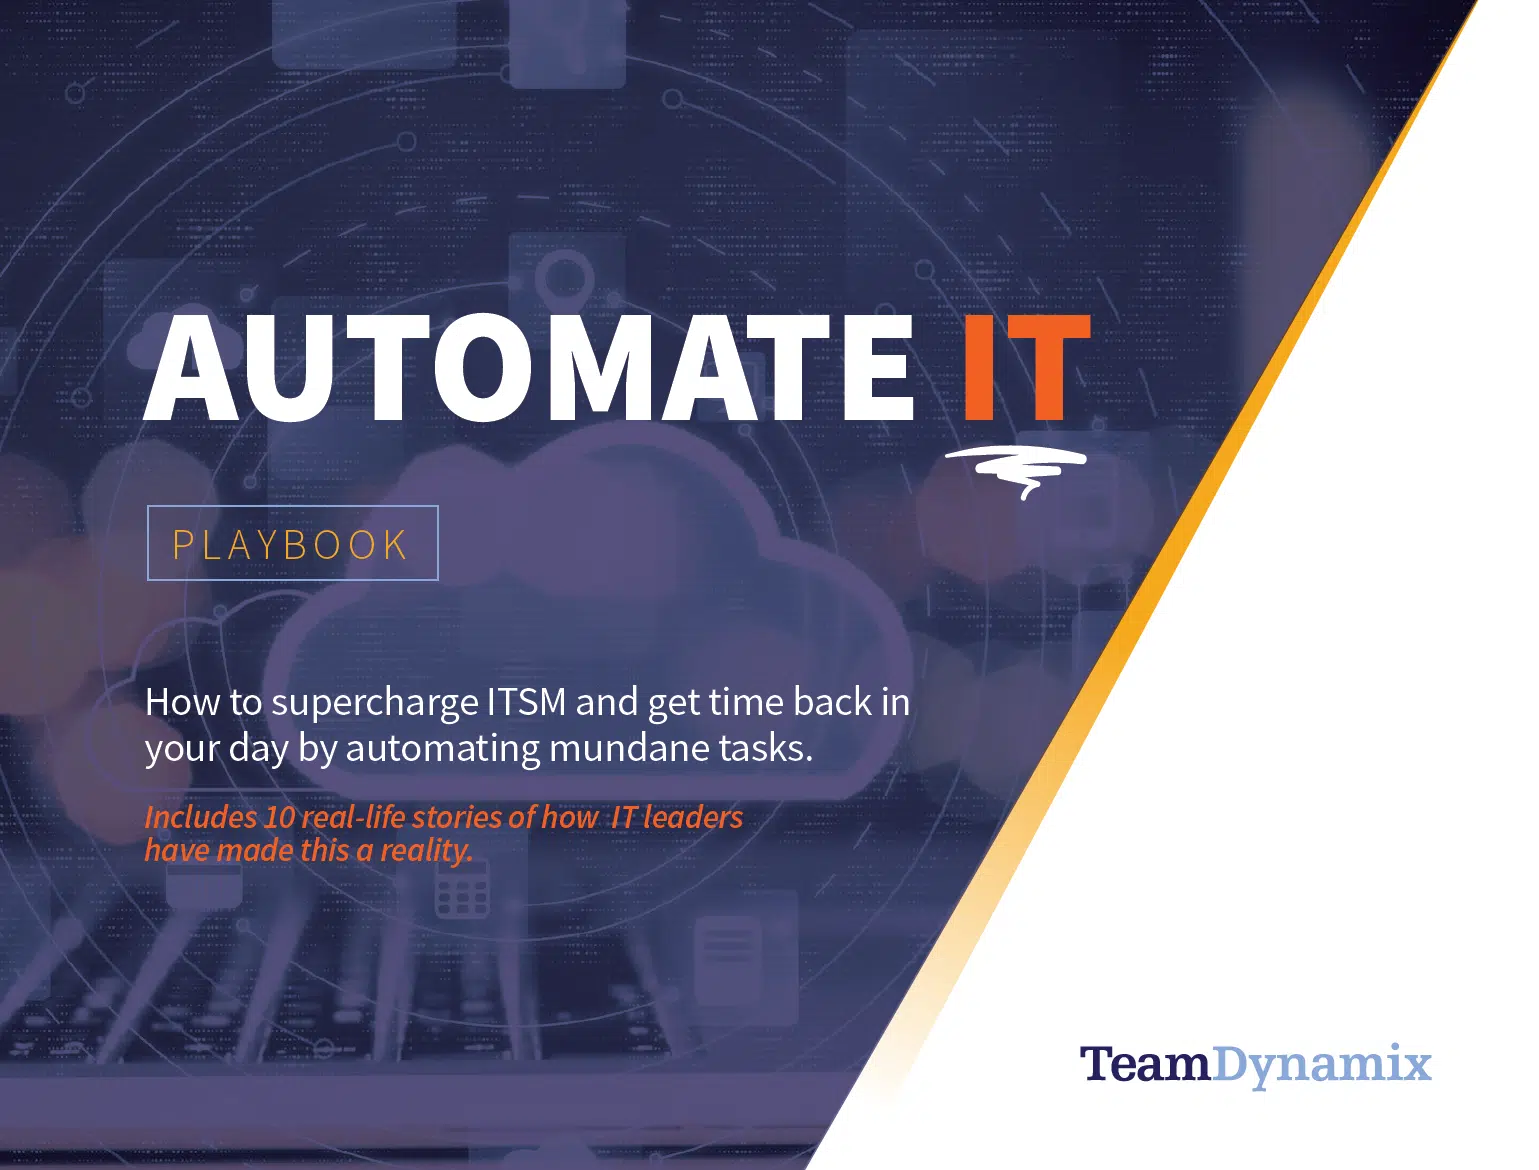 Automate IT ITSM with iPaaS